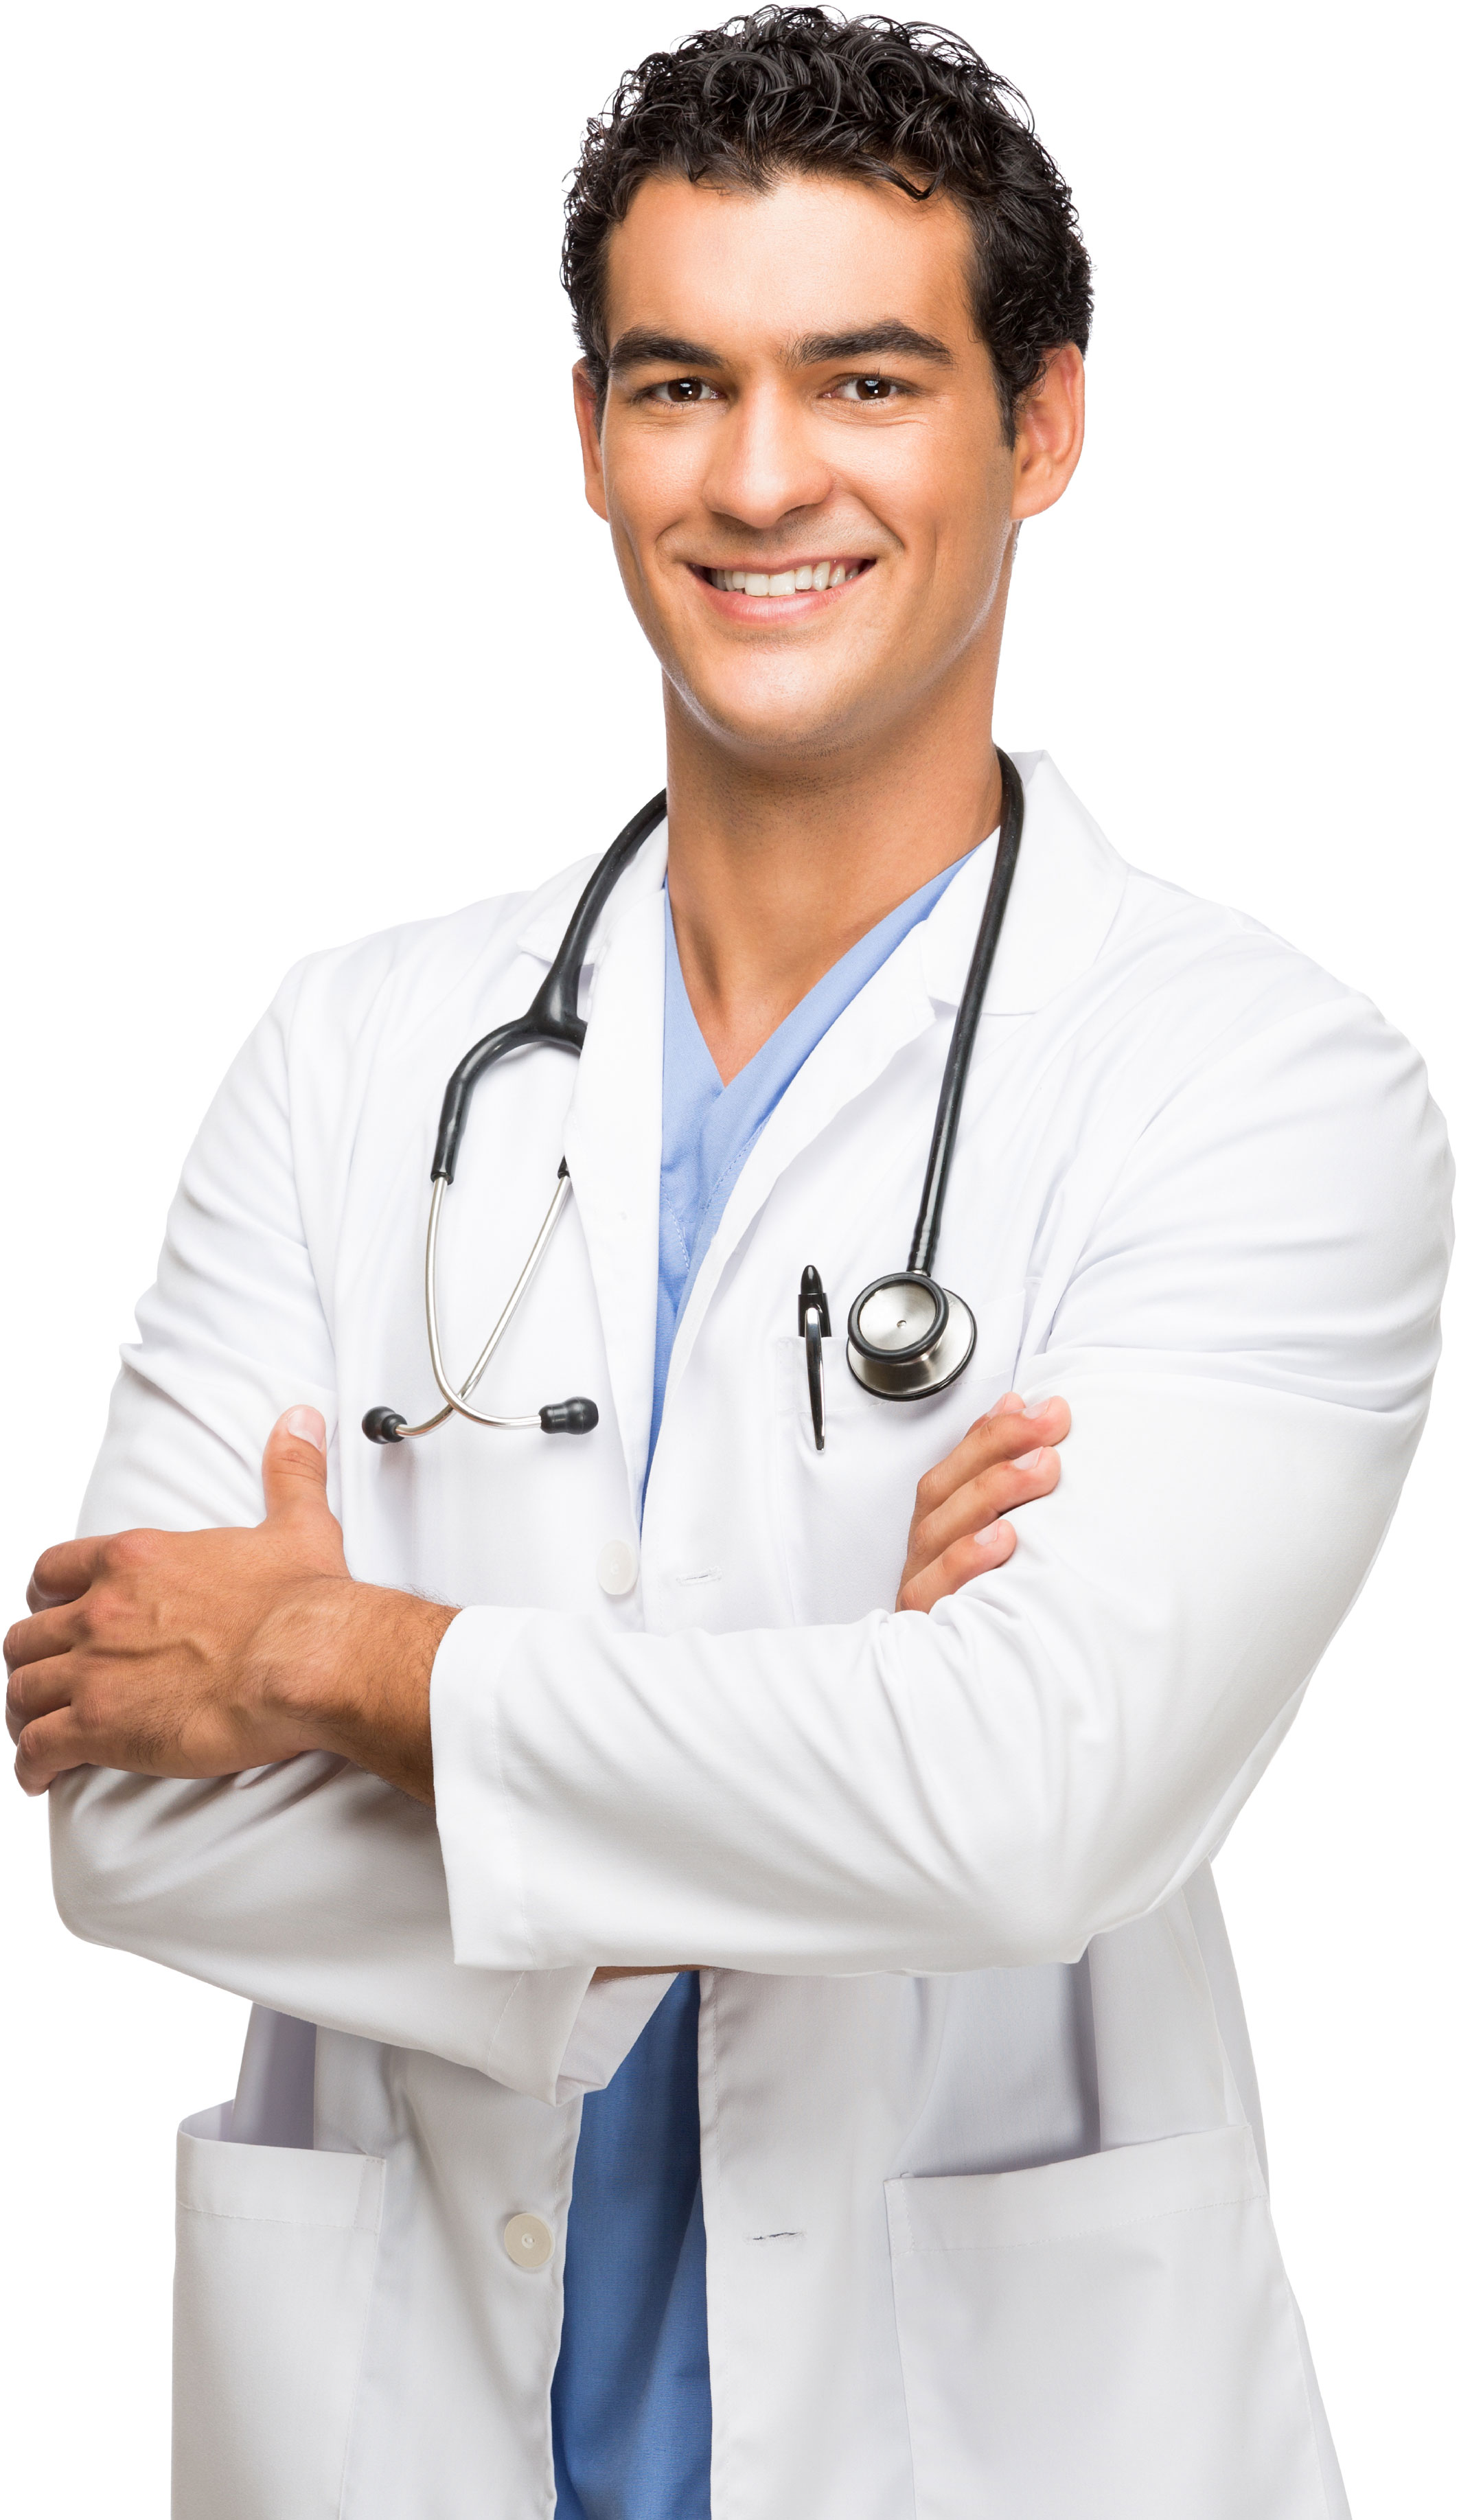 Friendly doctor smiling with arms crossed in a professional pose